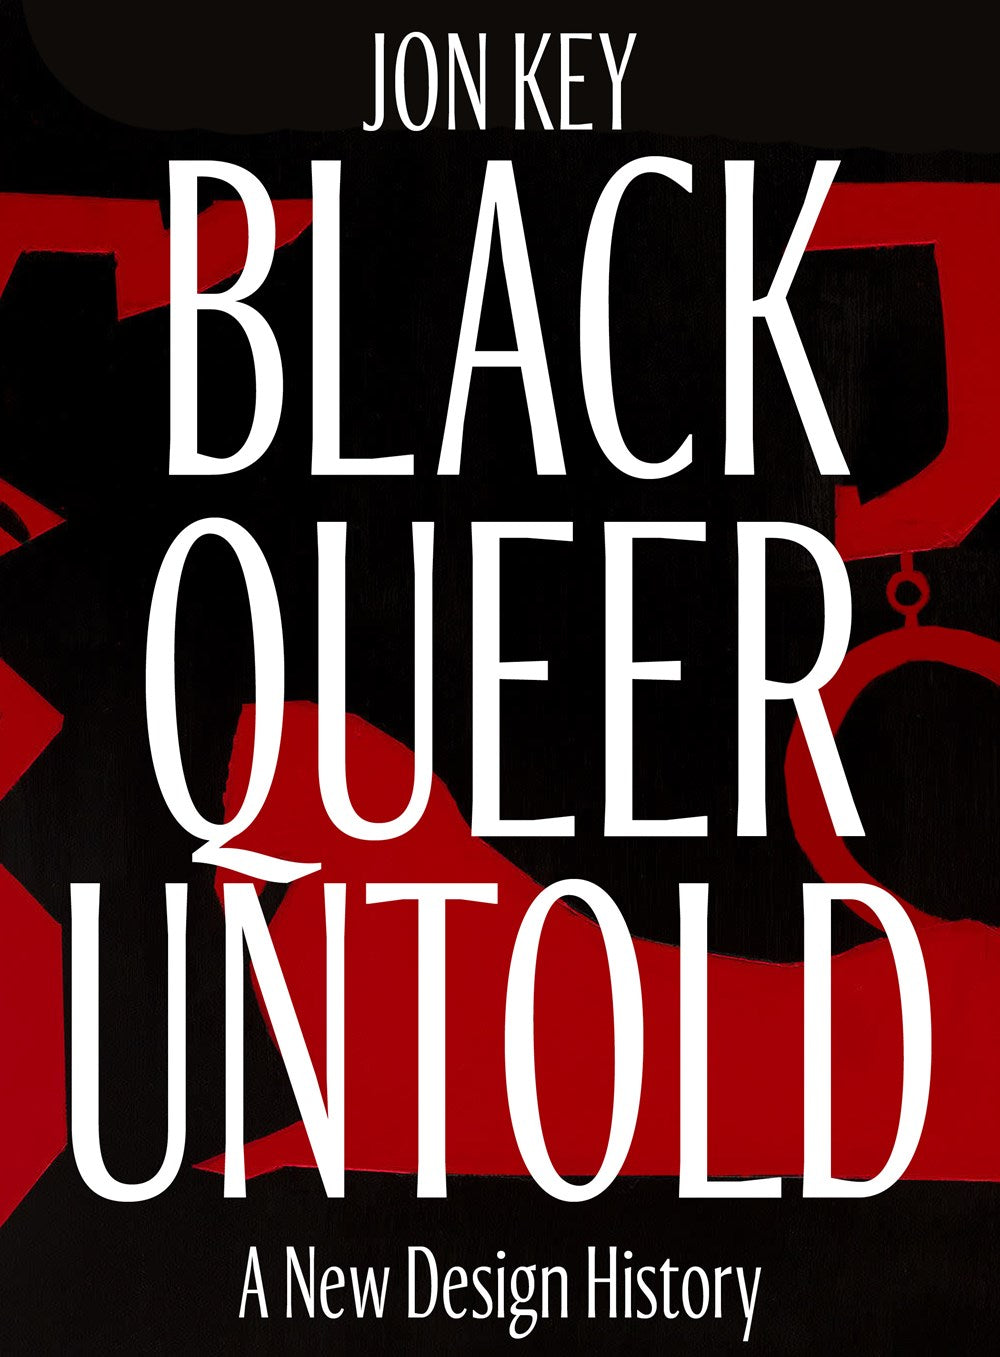 Black, Queer, and Untold: A New Design History by Jon Key (Hardcover) (PREORDER)